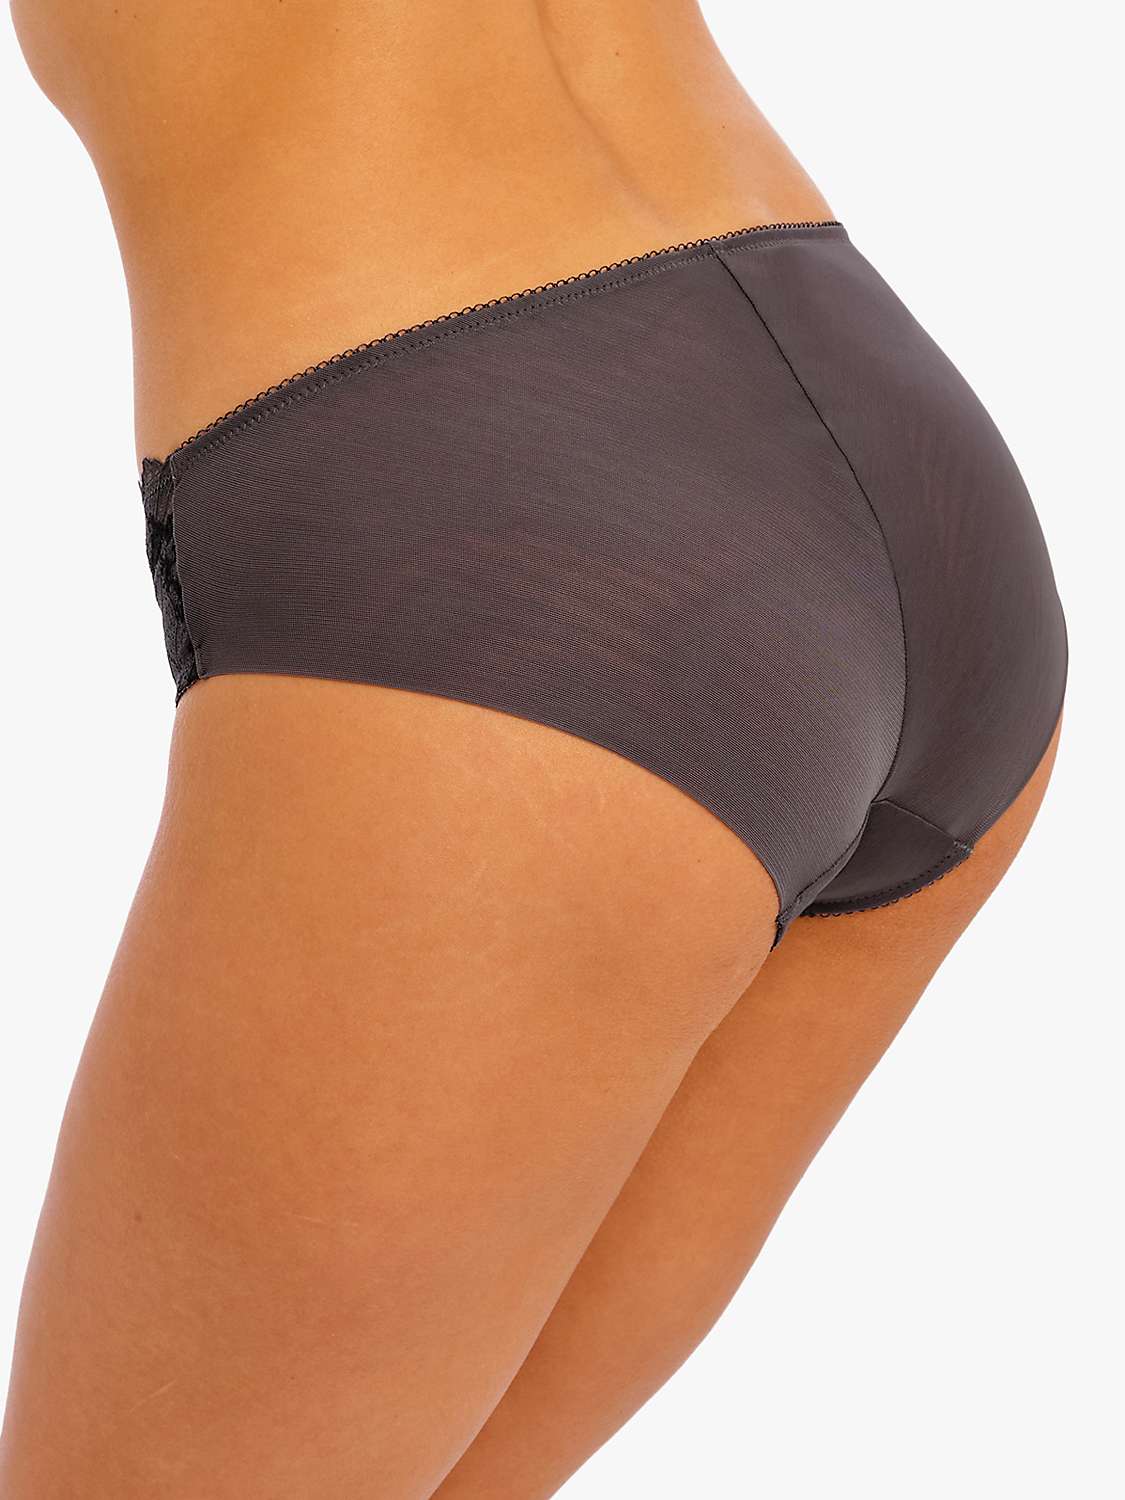 Buy Wacoal Lace Perfection Bikini Knickers Online at johnlewis.com